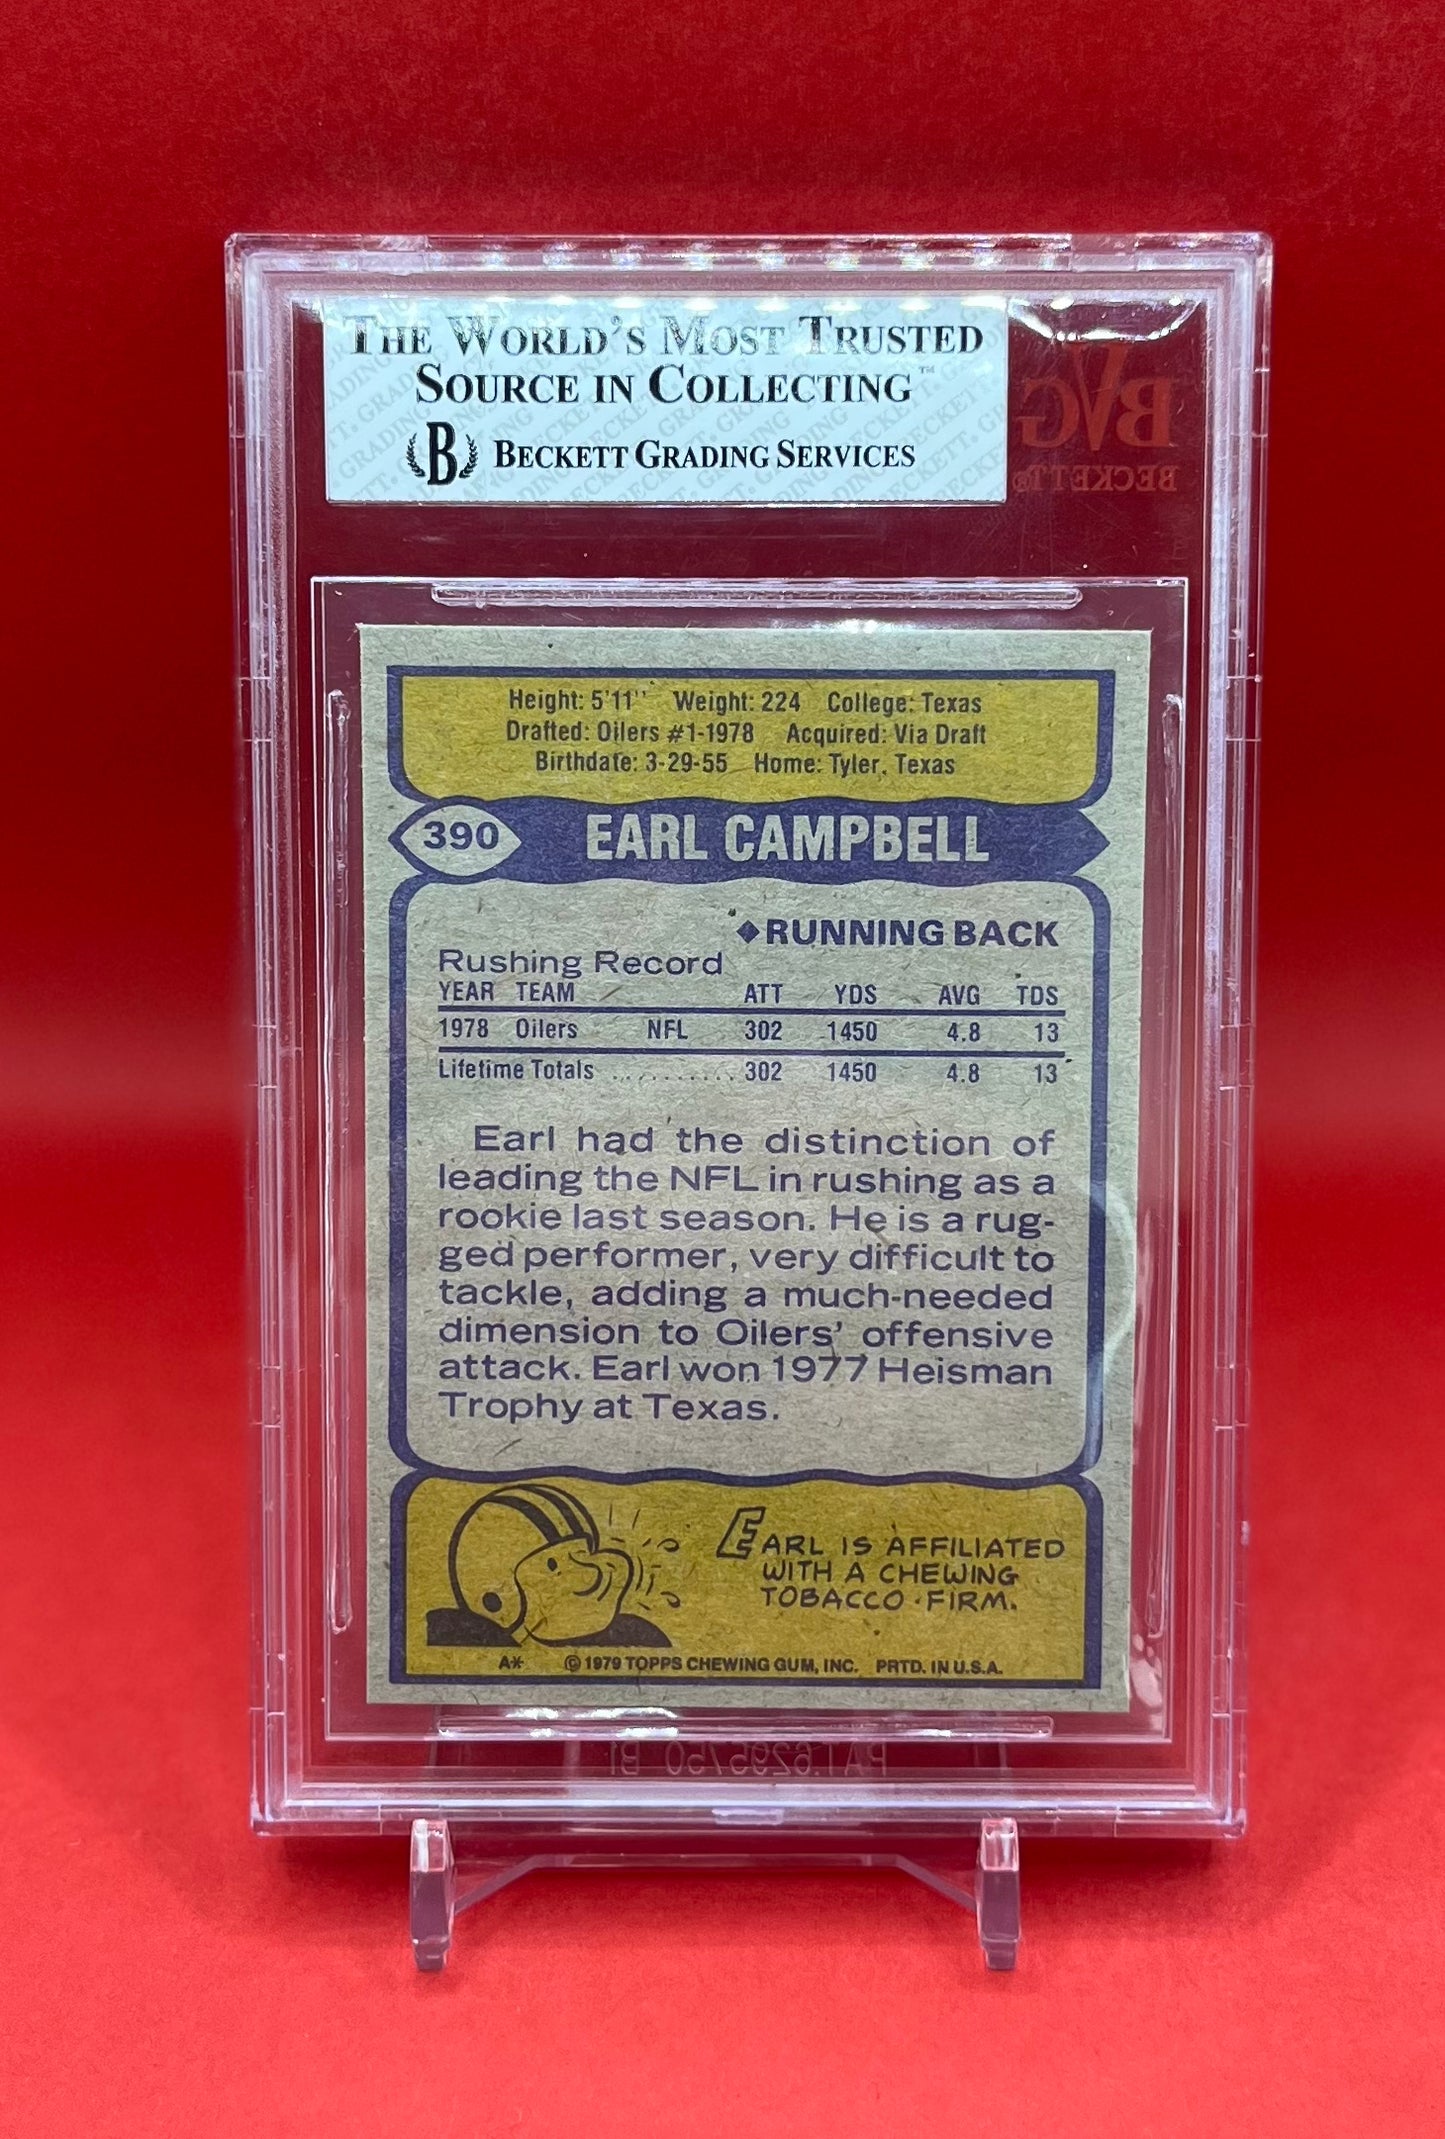 1979 #390 EARL CAMPBELL TOPPS CREAM COLORED - BECKETT 7 NM